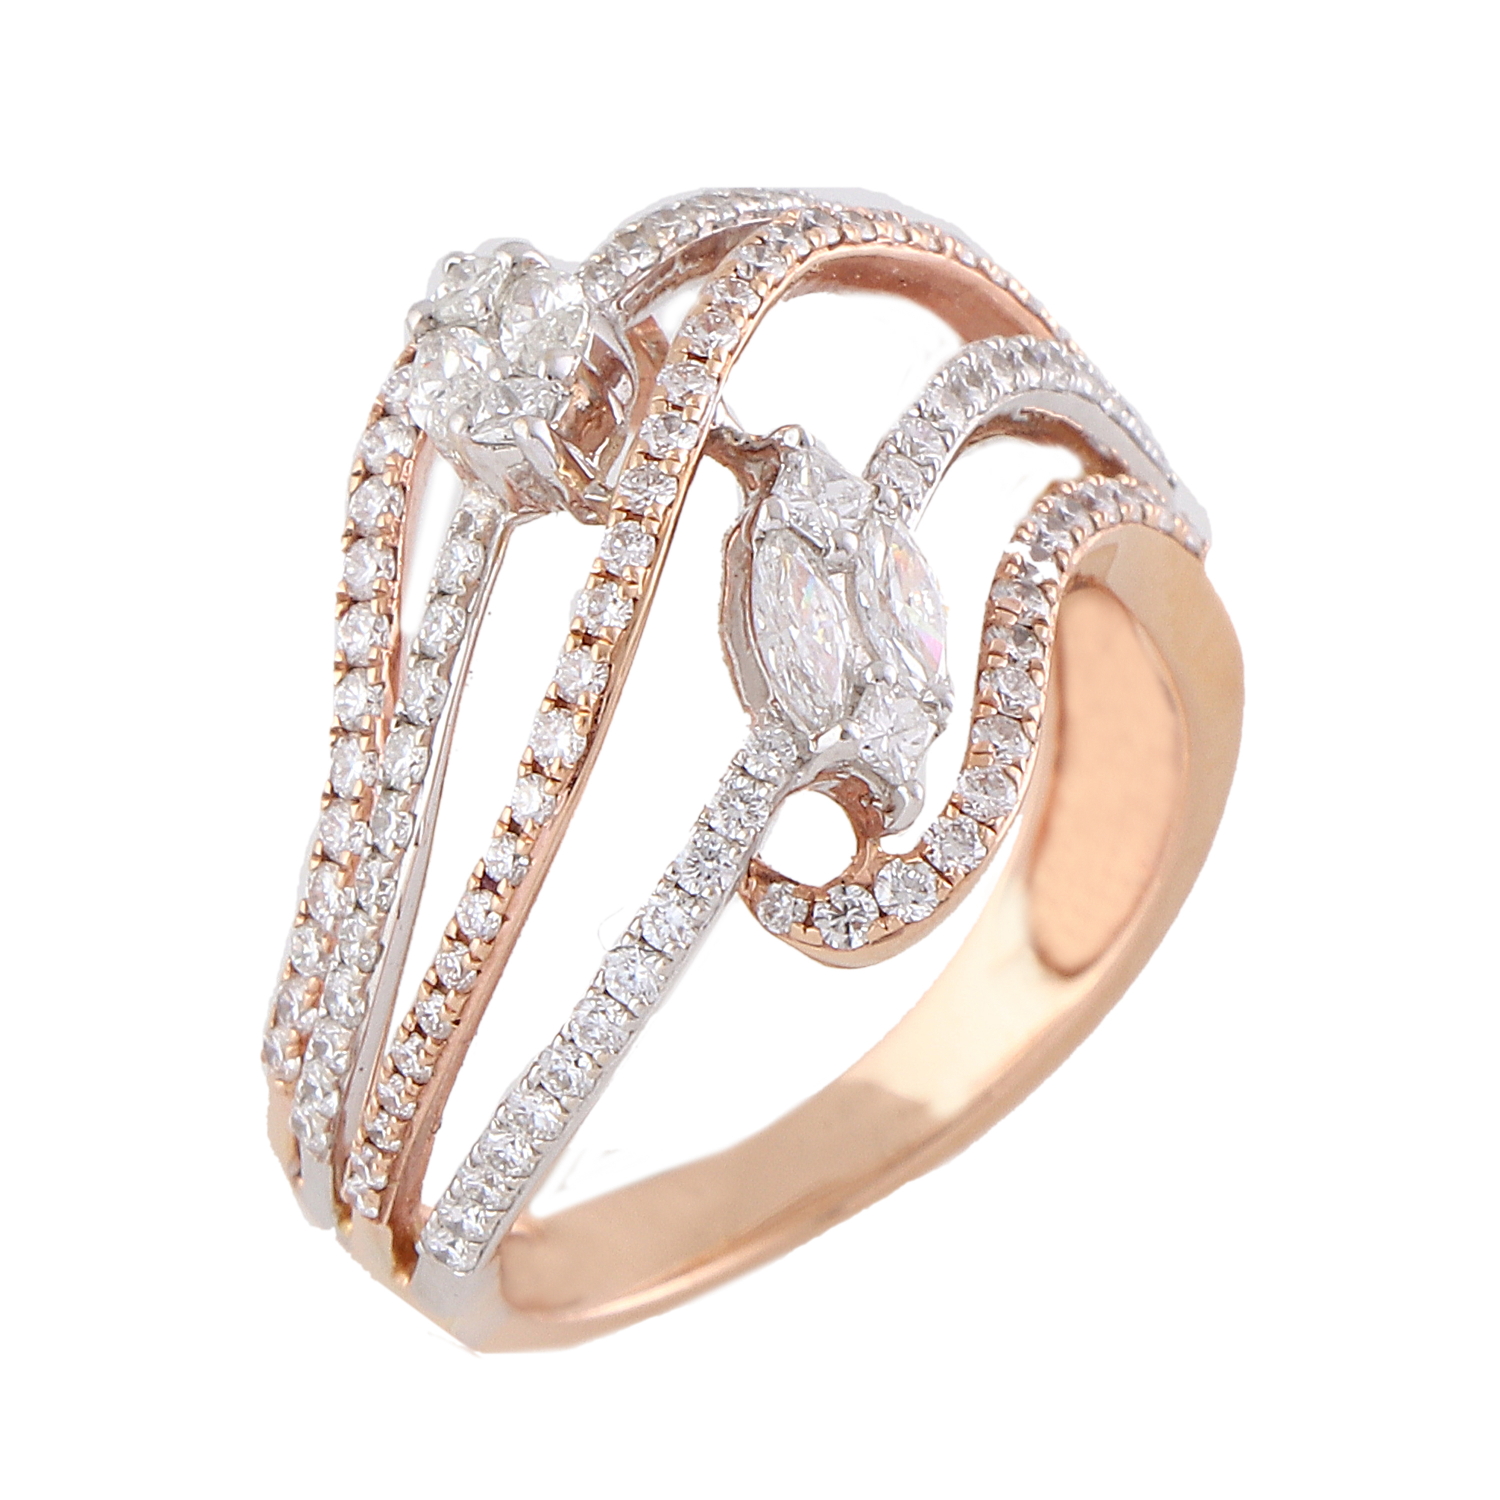 Buy quality 18kt / 750 rose gold cocktail party diamond ladies ring 9lr132  in Pune